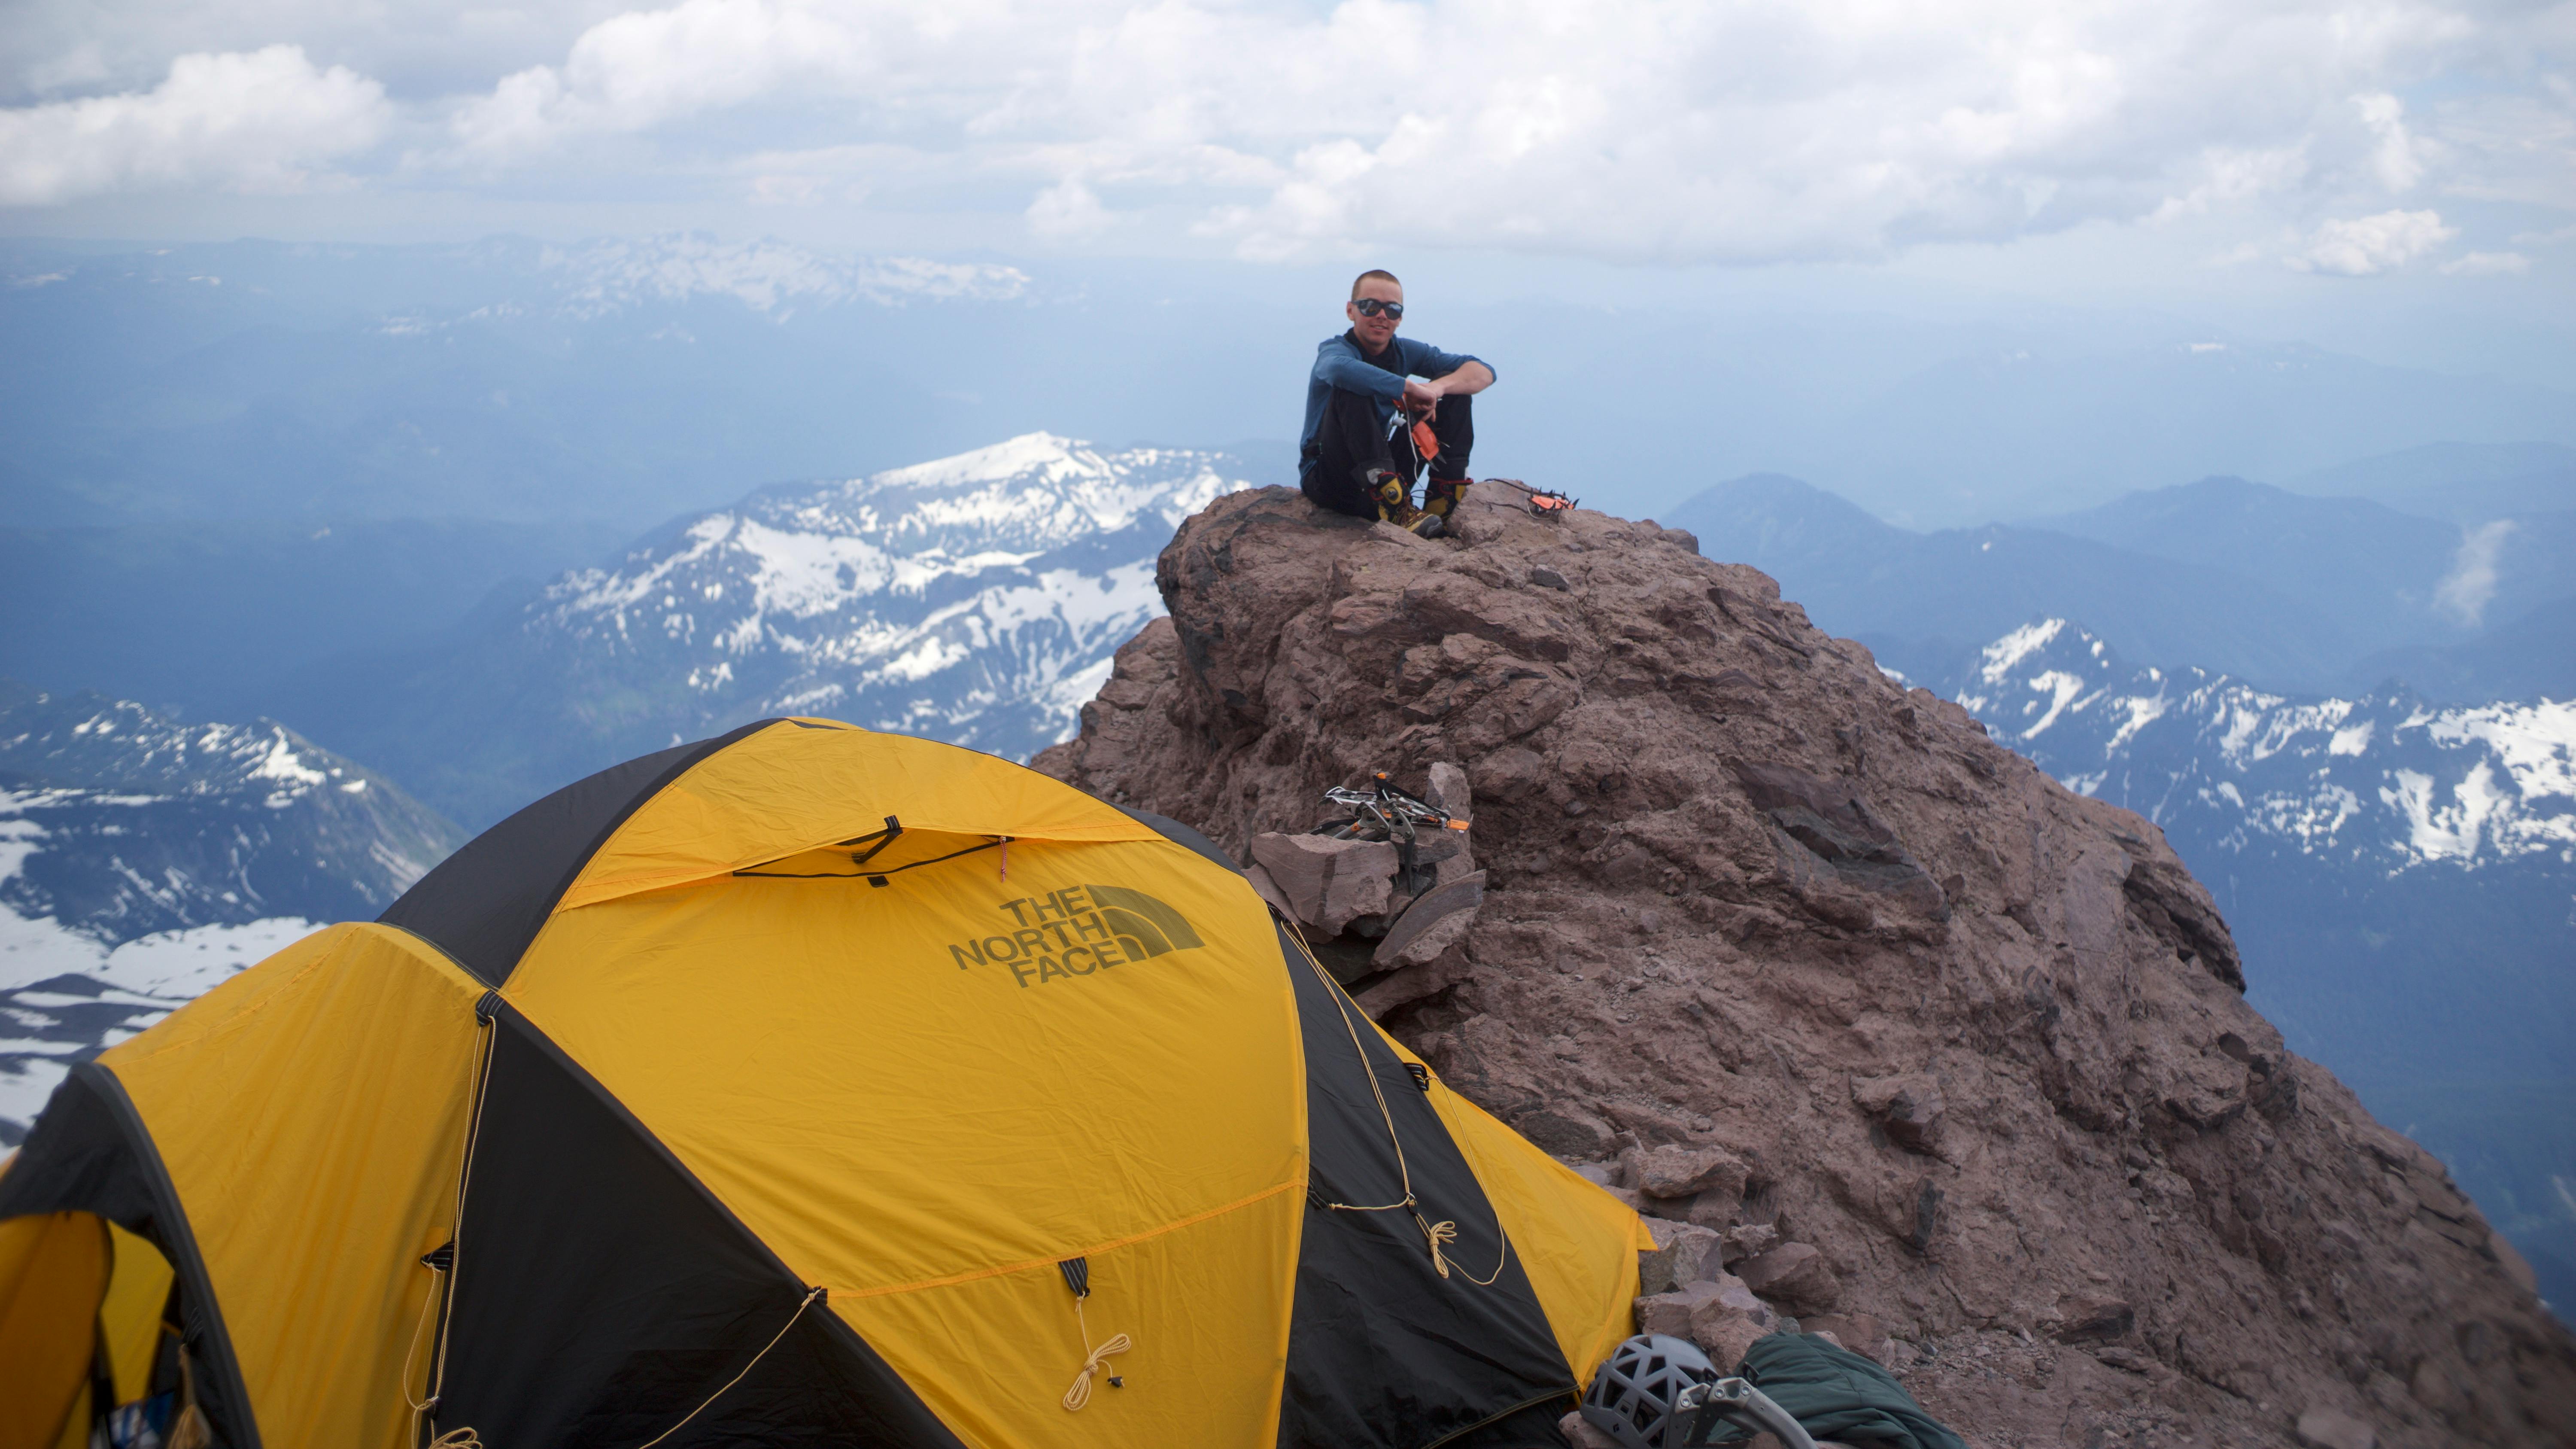 A man sits on a rock in front of snowy mountains with a yellow tent to his left